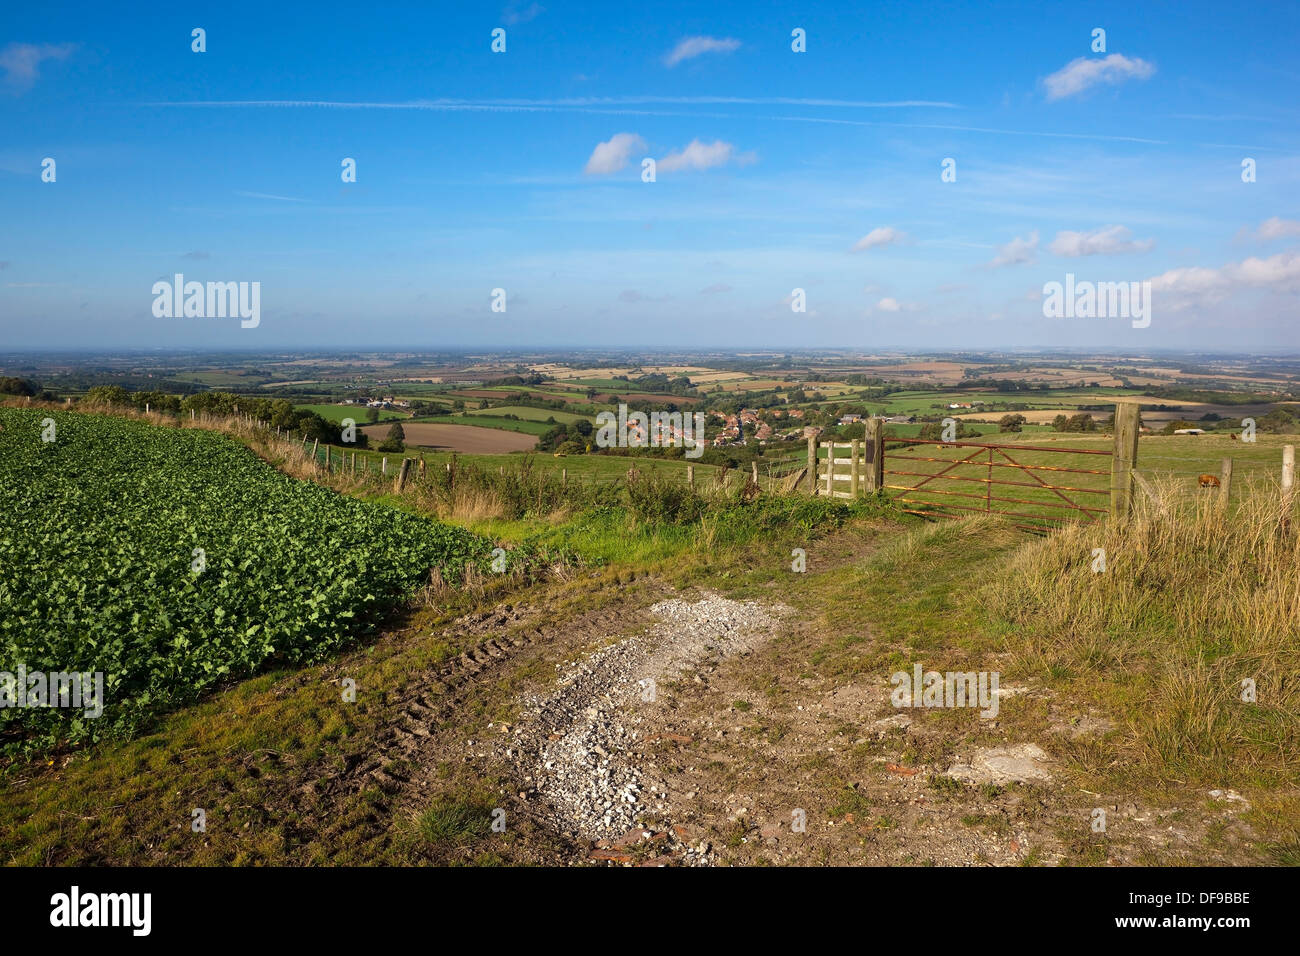 English landscape with a view of Acklam village from agricultural fields high on the Yorkshire wolds under a blue sky Stock Photo